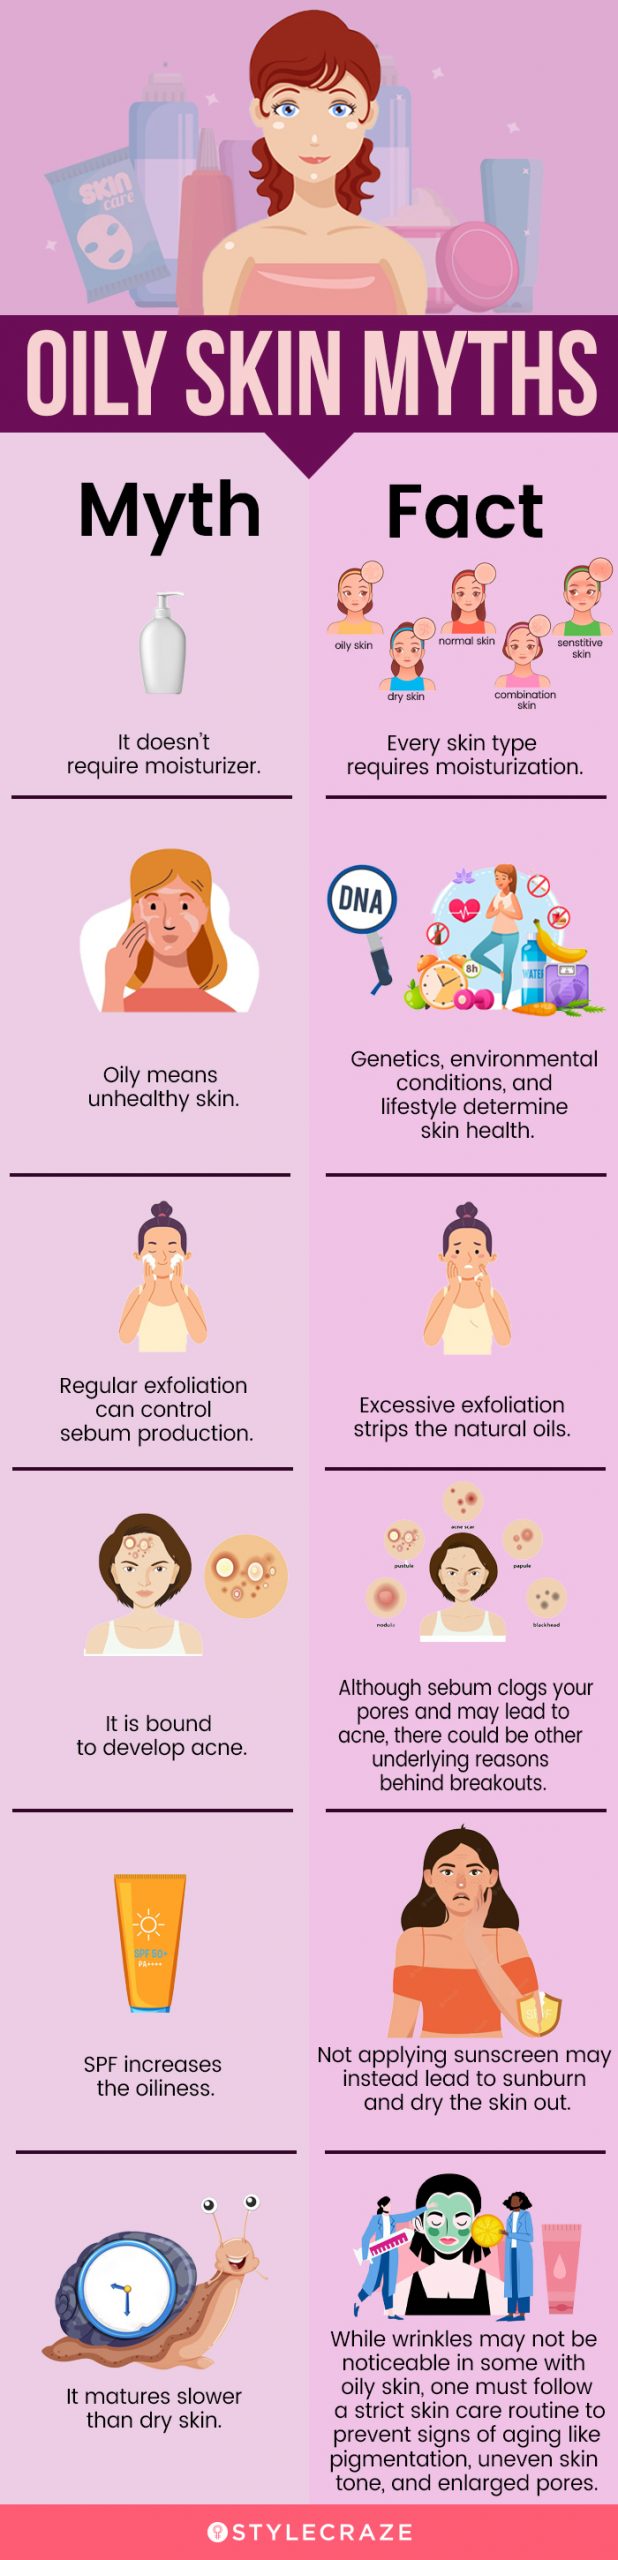 oily skin myths (infographic)